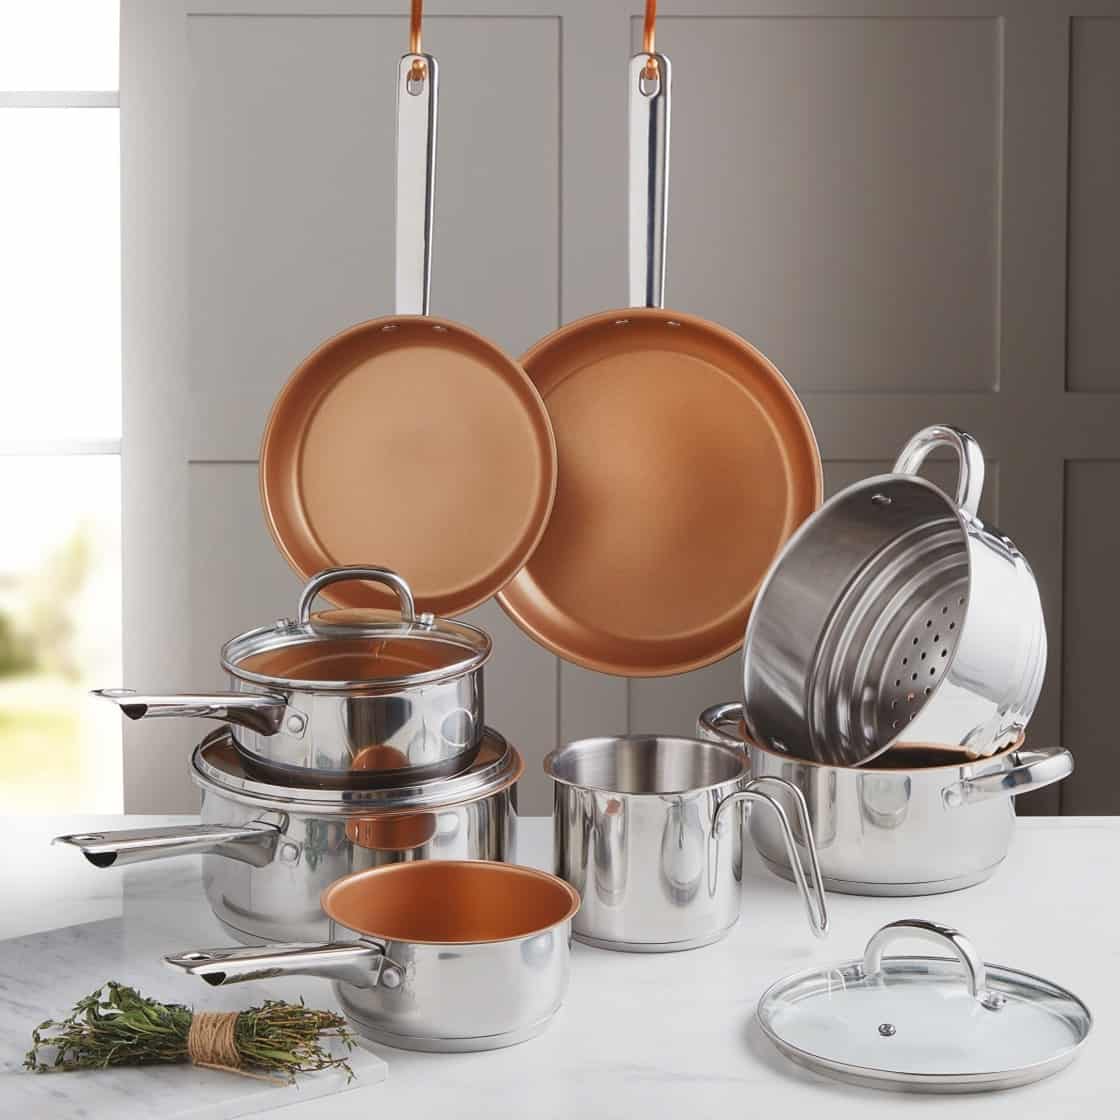 are red copper pans safe